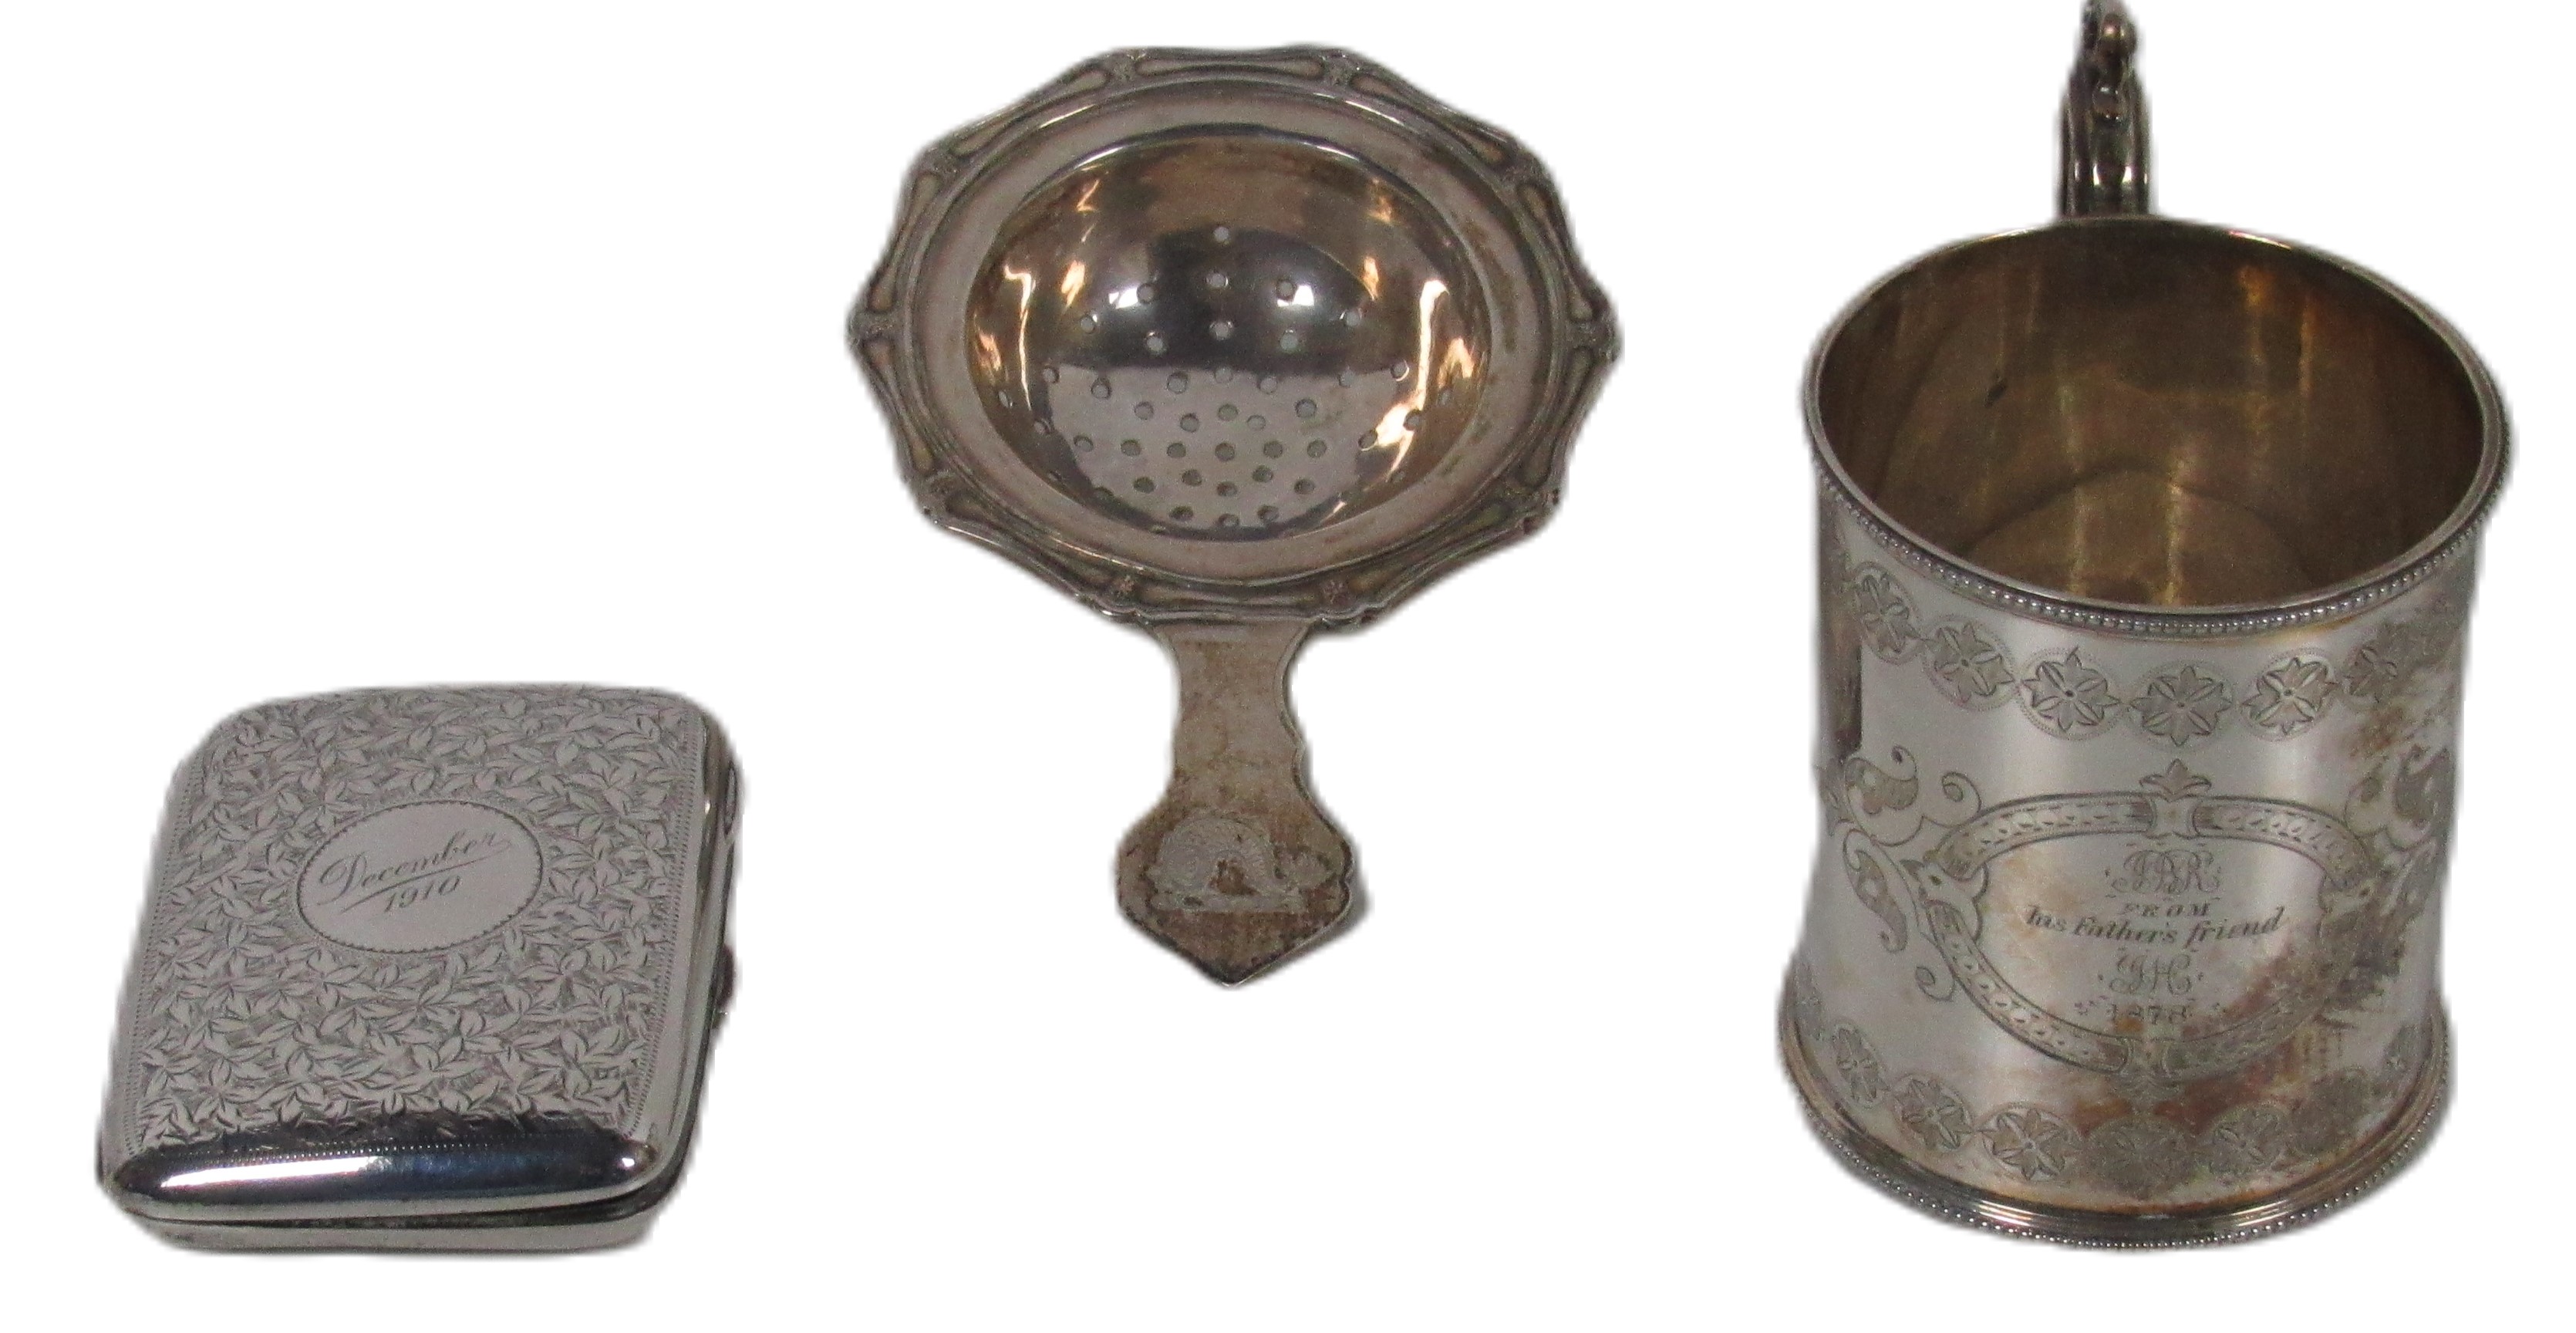 An Irish silver Tea Strainer, by William Egan, Dublin, of unusual form with crest, approx. 1